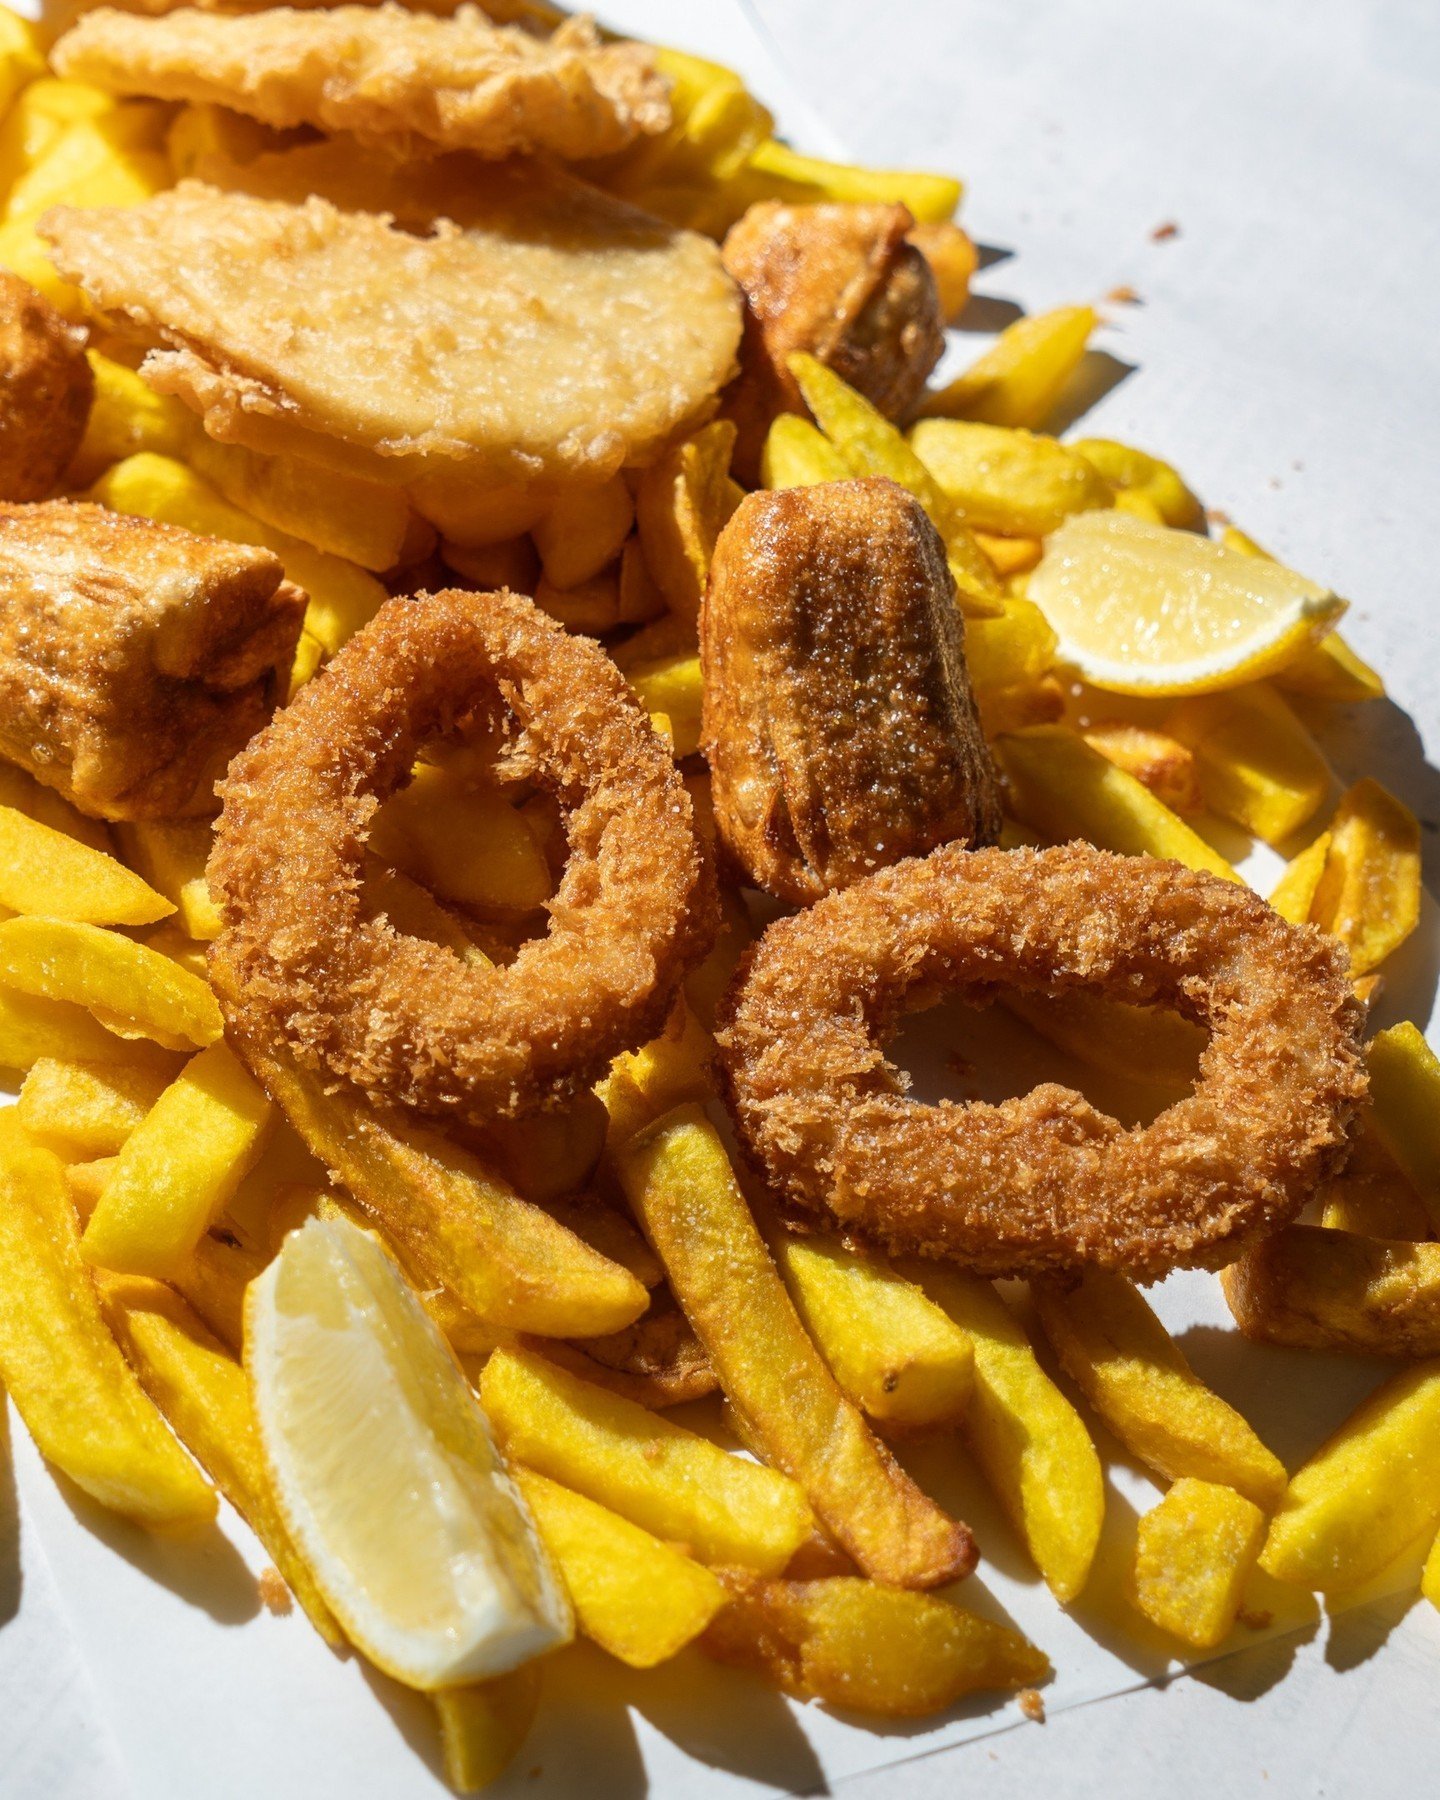 The sun is out, and so are the fish and chips! Fresh, crispy golden calamari, dim sims, potatoes cakes and chips. Is there a better fish and chip spread? ⁠
⁠
View all of our value packs today.⁠
www.sharktankseafood.com.au/menu